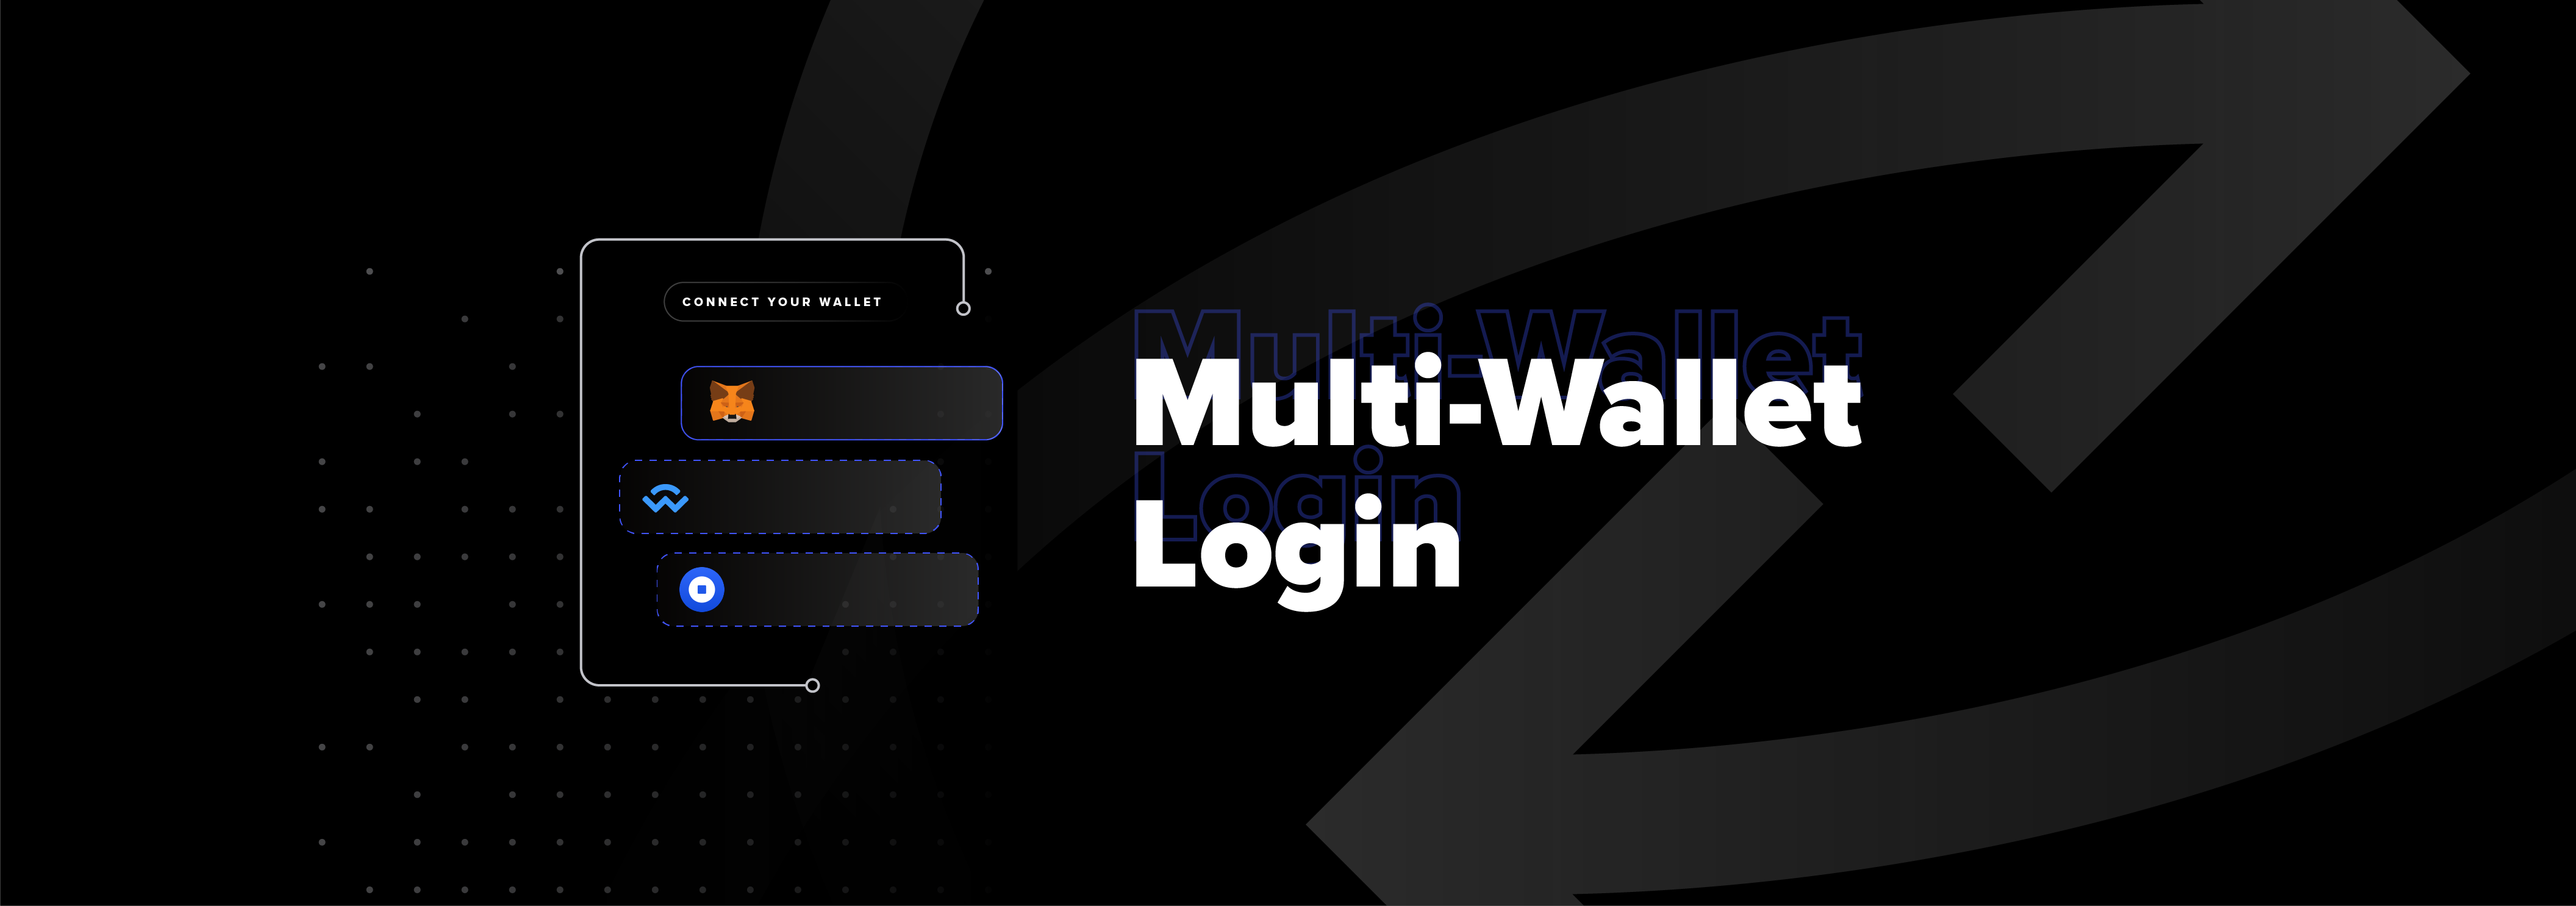 Introducing Multi-Wallet Login. Now you can connect to the ...